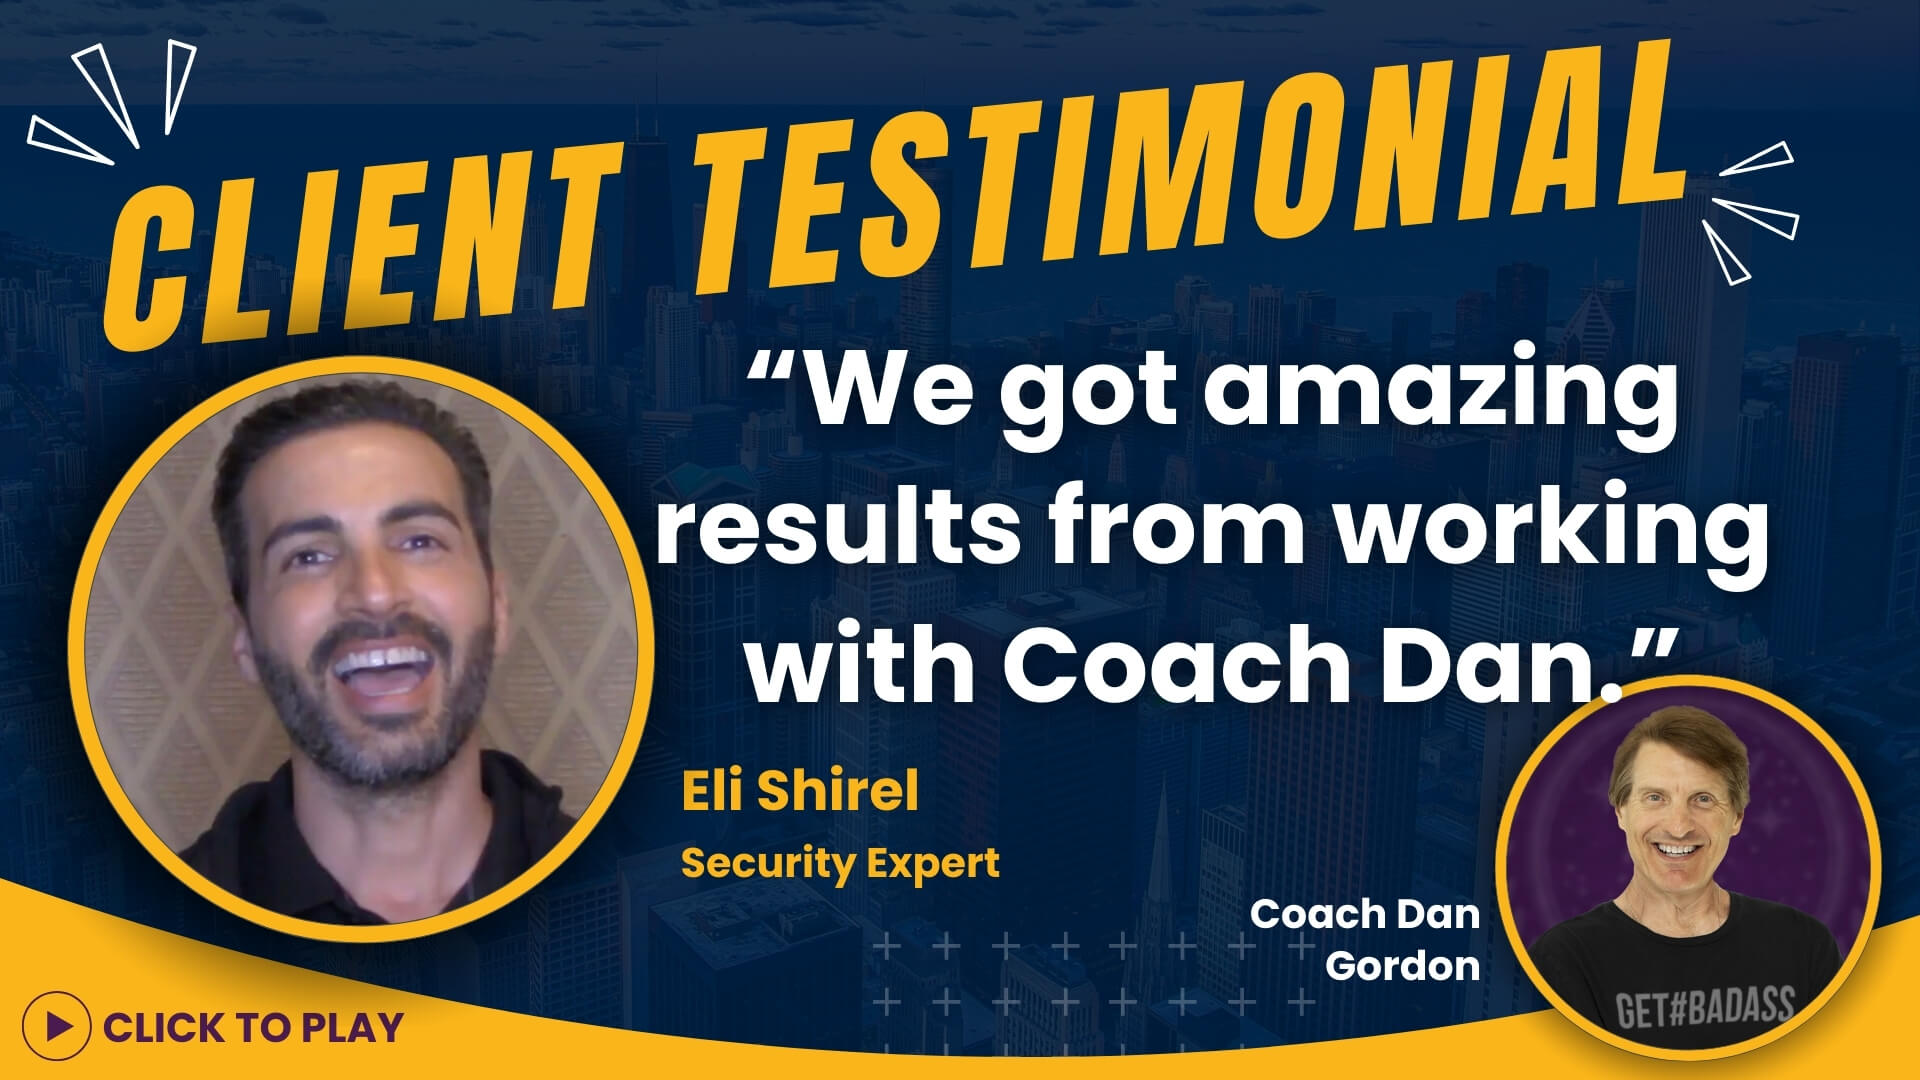 Security expert Eli Shirel gives a glowing testimonial about Coach Dan Gordon, highlighting the remarkable results from their collaboration, with a 'Click to Play' button.